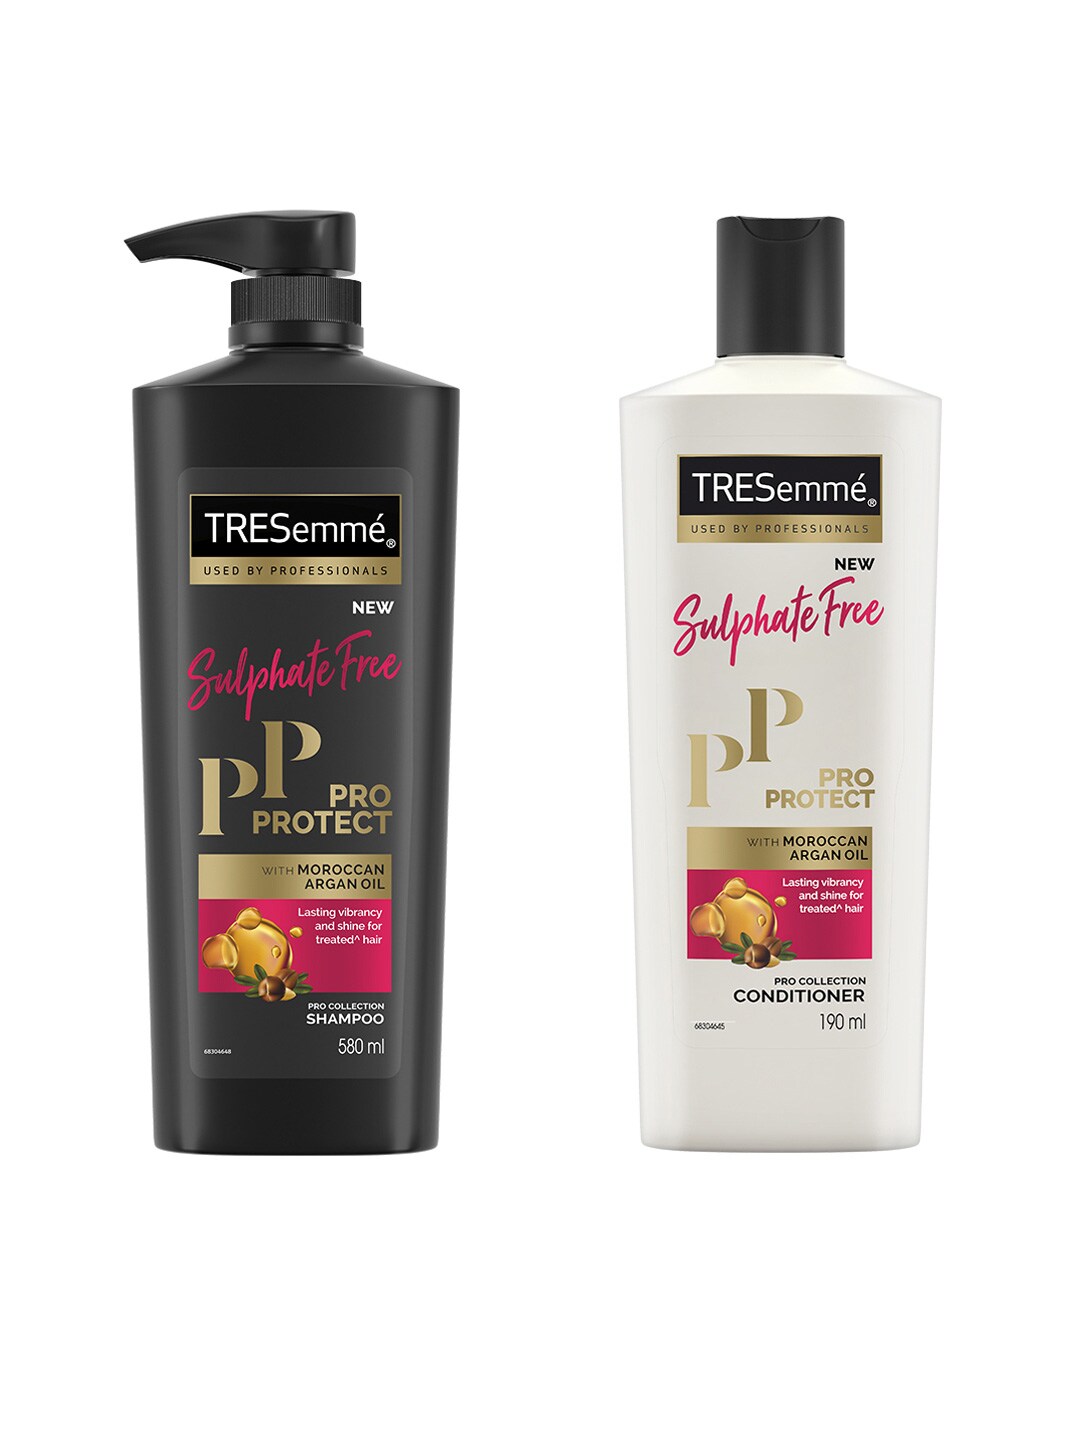 TRESemme Unisex Set of Pro Protect Sulphate Free Shampoo & Conditionetr Price in India